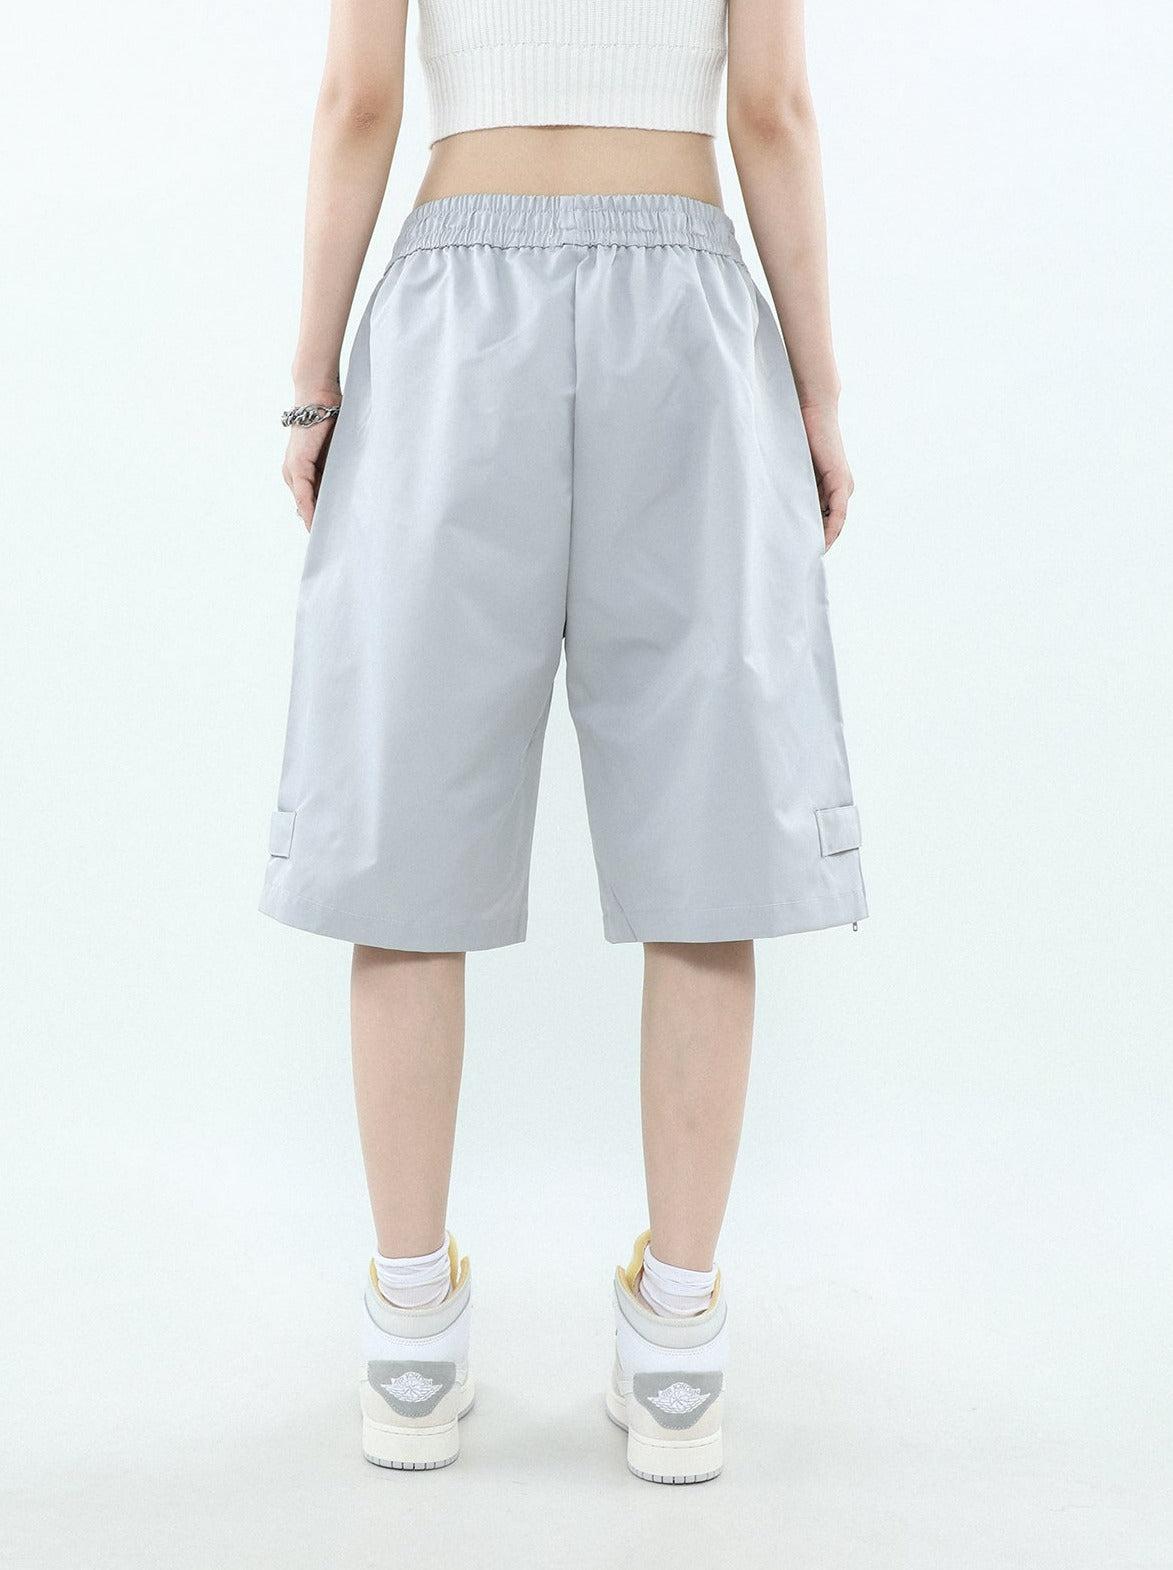 Zippered Buttoned Sports Shorts Korean Street Fashion Shorts By Mr Nearly Shop Online at OH Vault